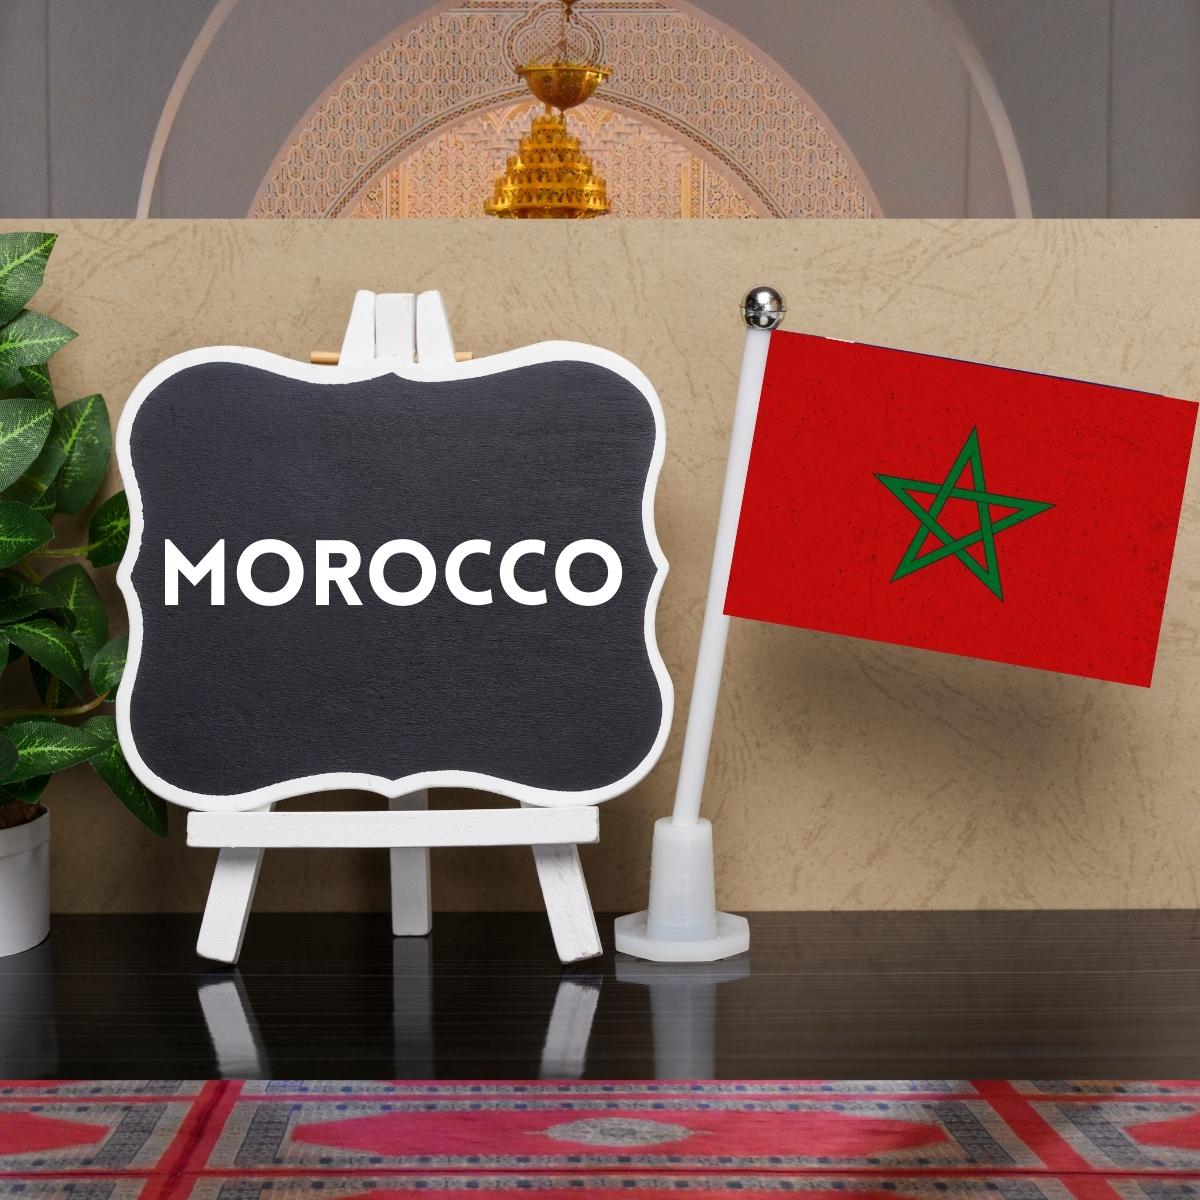 Morocco at Euro Fine Foods